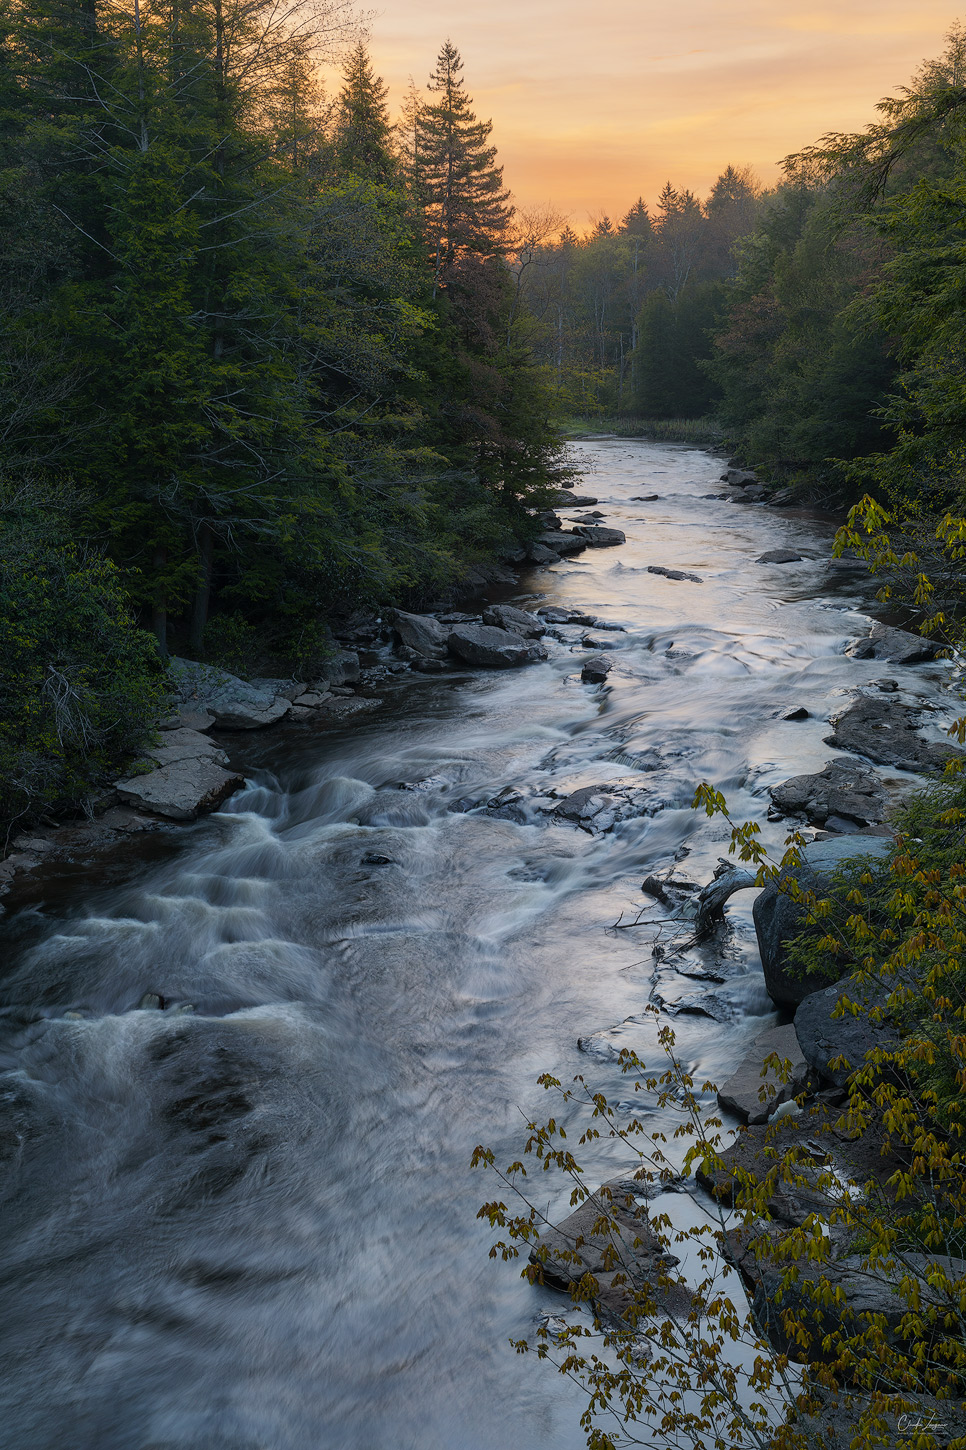 View of Blackwater River at Blackwater Falls State Park in West Virginia at sunrise.